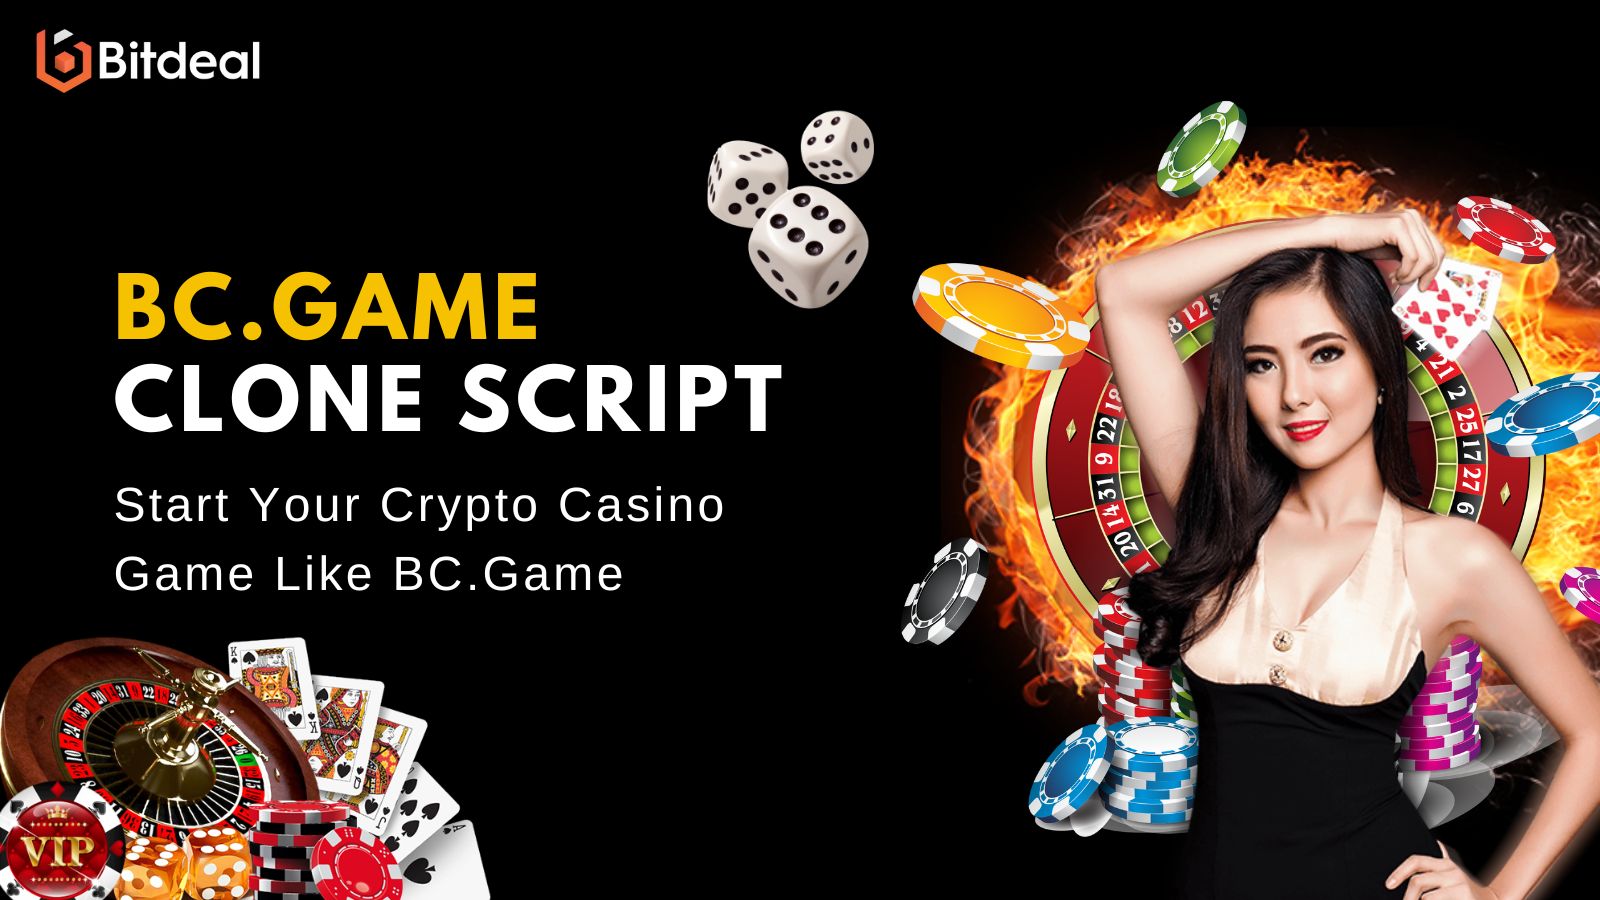 BC.Game Clone To Build Crypto Casino Game Like BC. Game